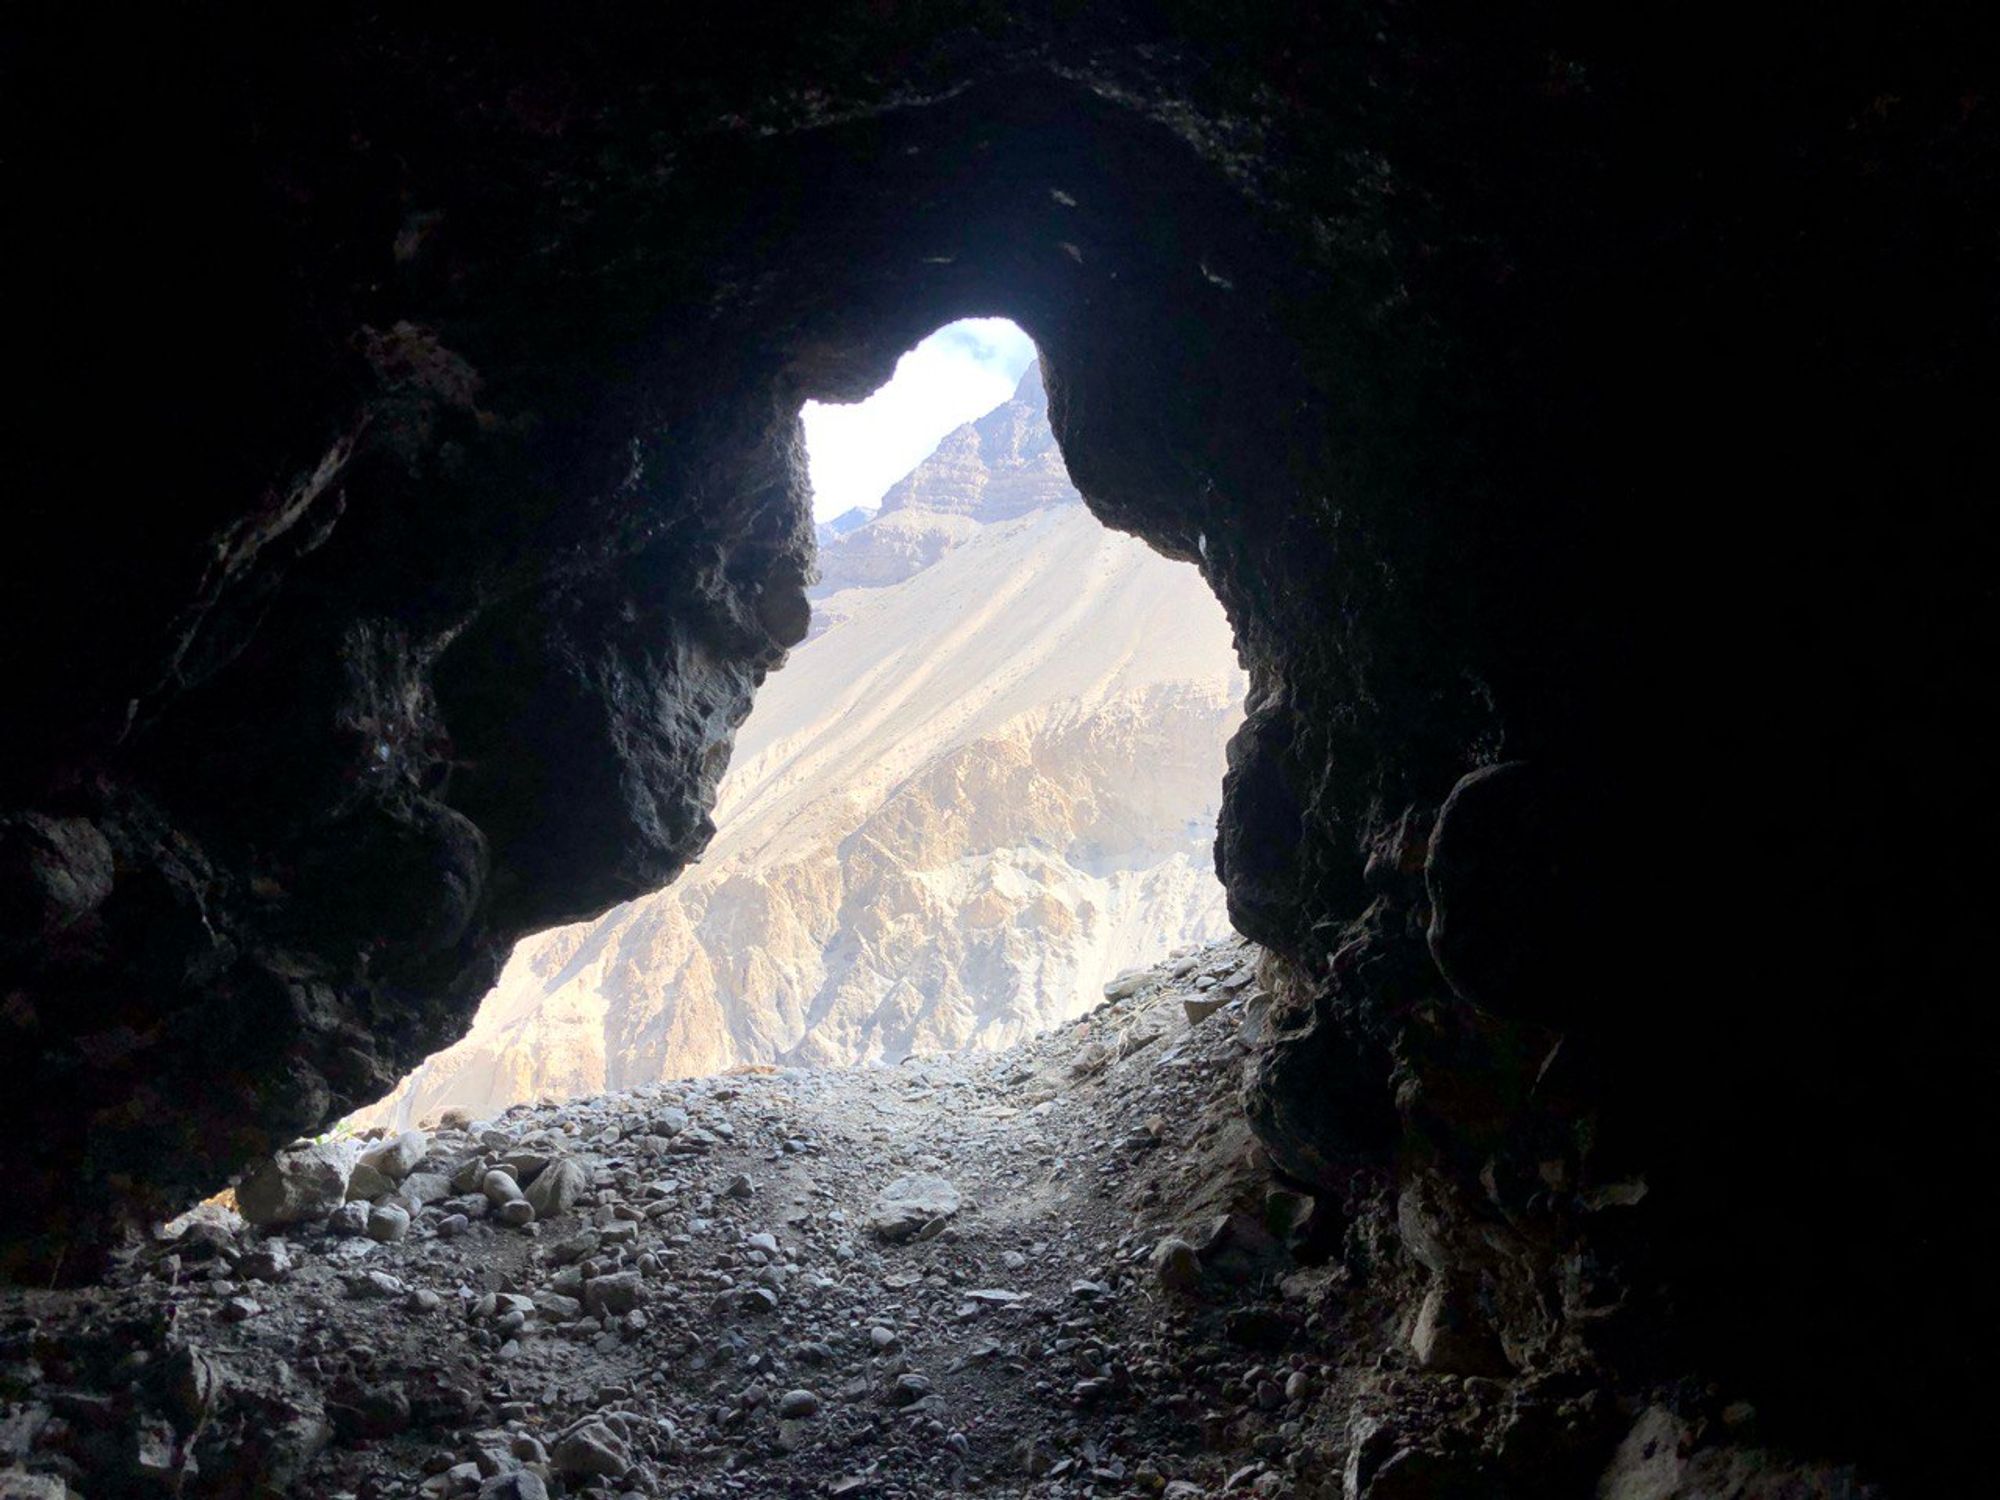 View from a cave opposite the Tabo monastery